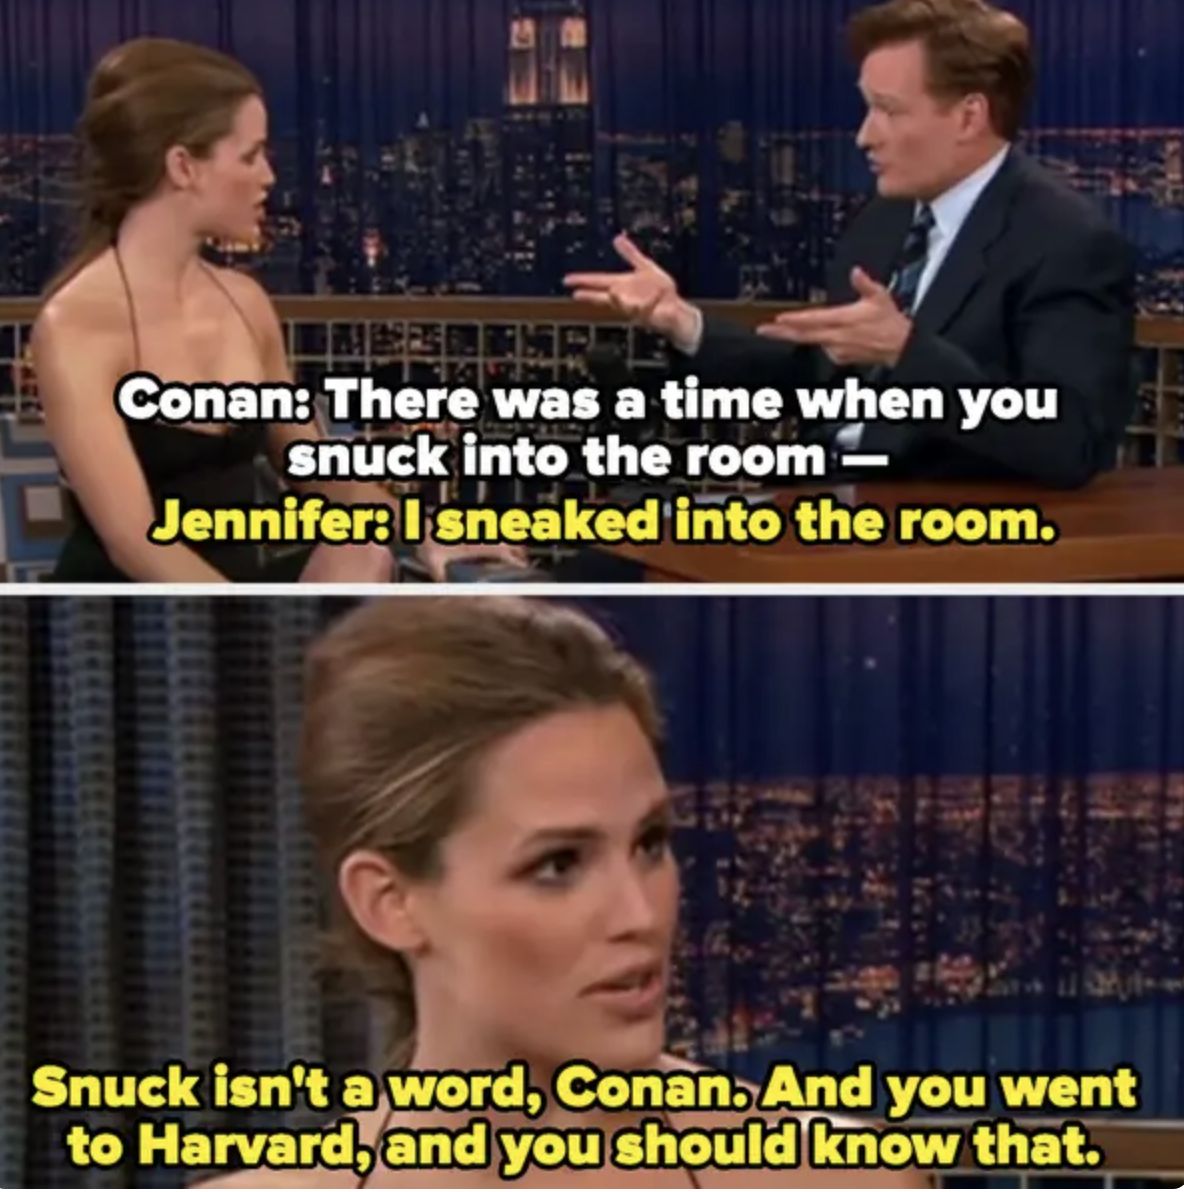 Conan O&#x27;Brien and Jennifer Garner on a talk show discussing grammar. Conan: &quot;There was a time when you snuck into the room—&quot; Jennifer: &quot;I sneaked into the room.&quot;